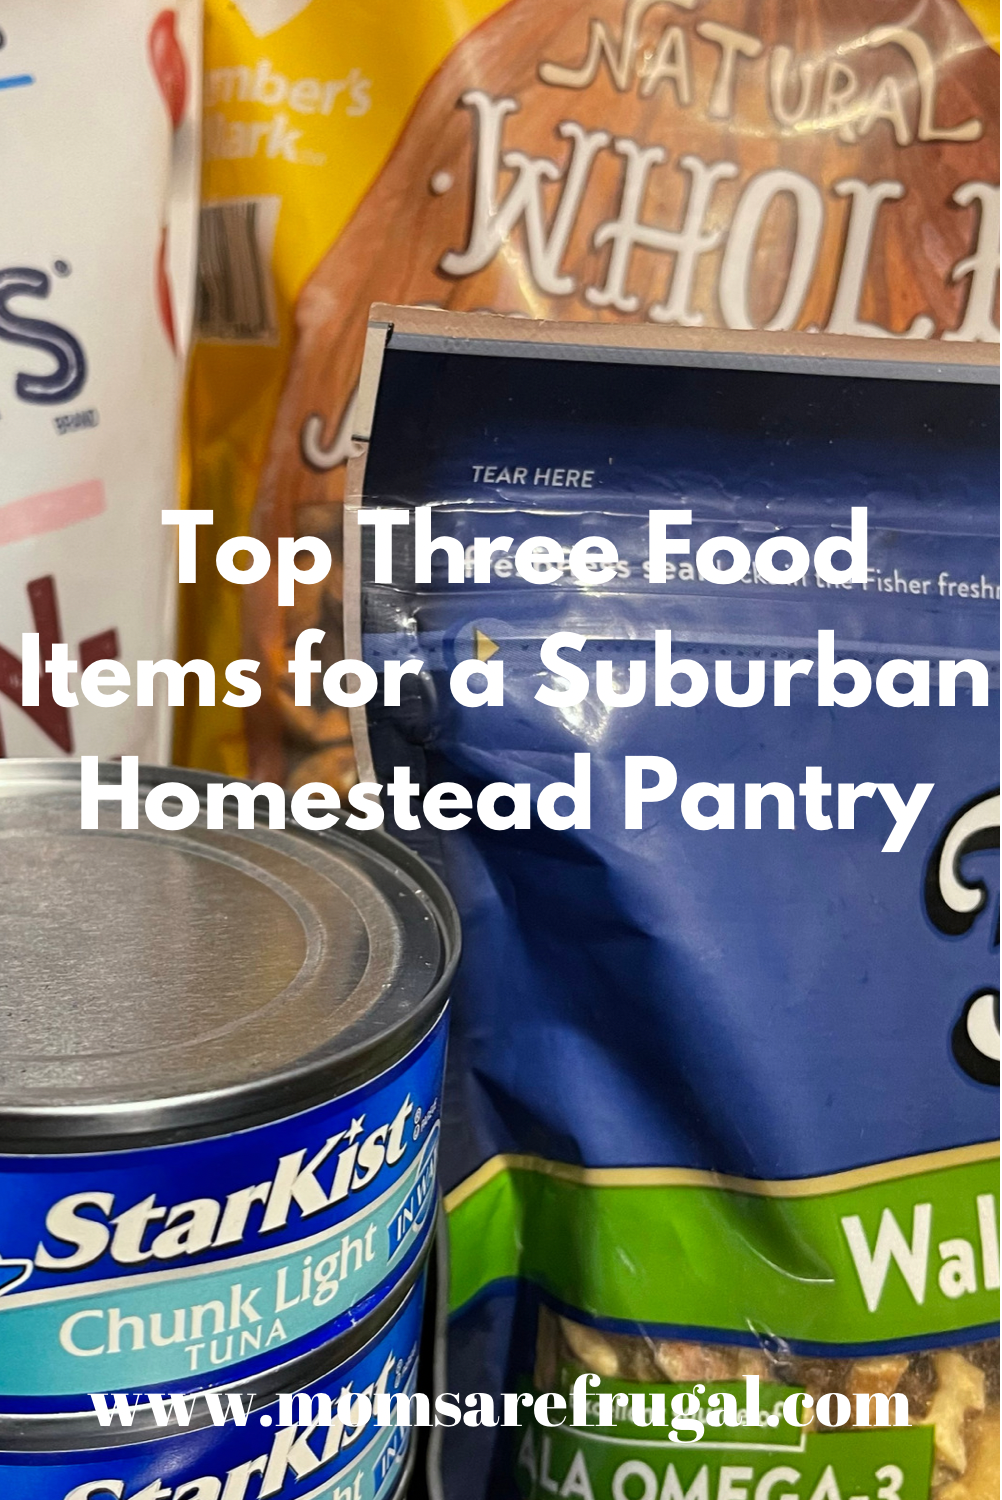 Top Three Food Items for A Suburban Homestead Pantry